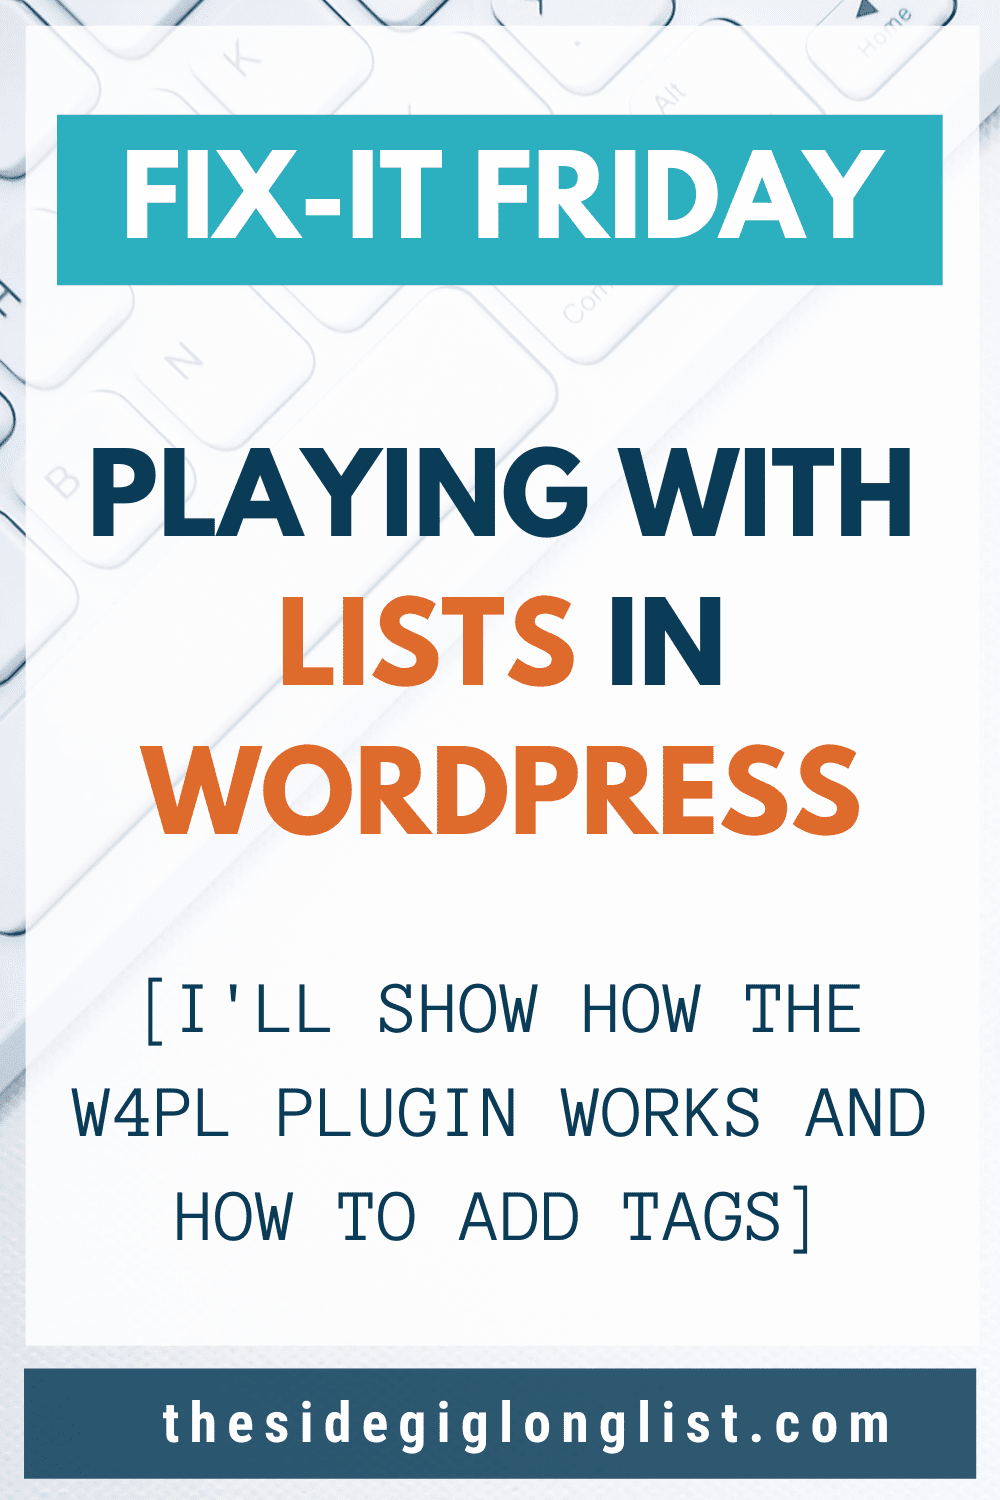 Fix-It Friday - Playing With Lists In WordPress